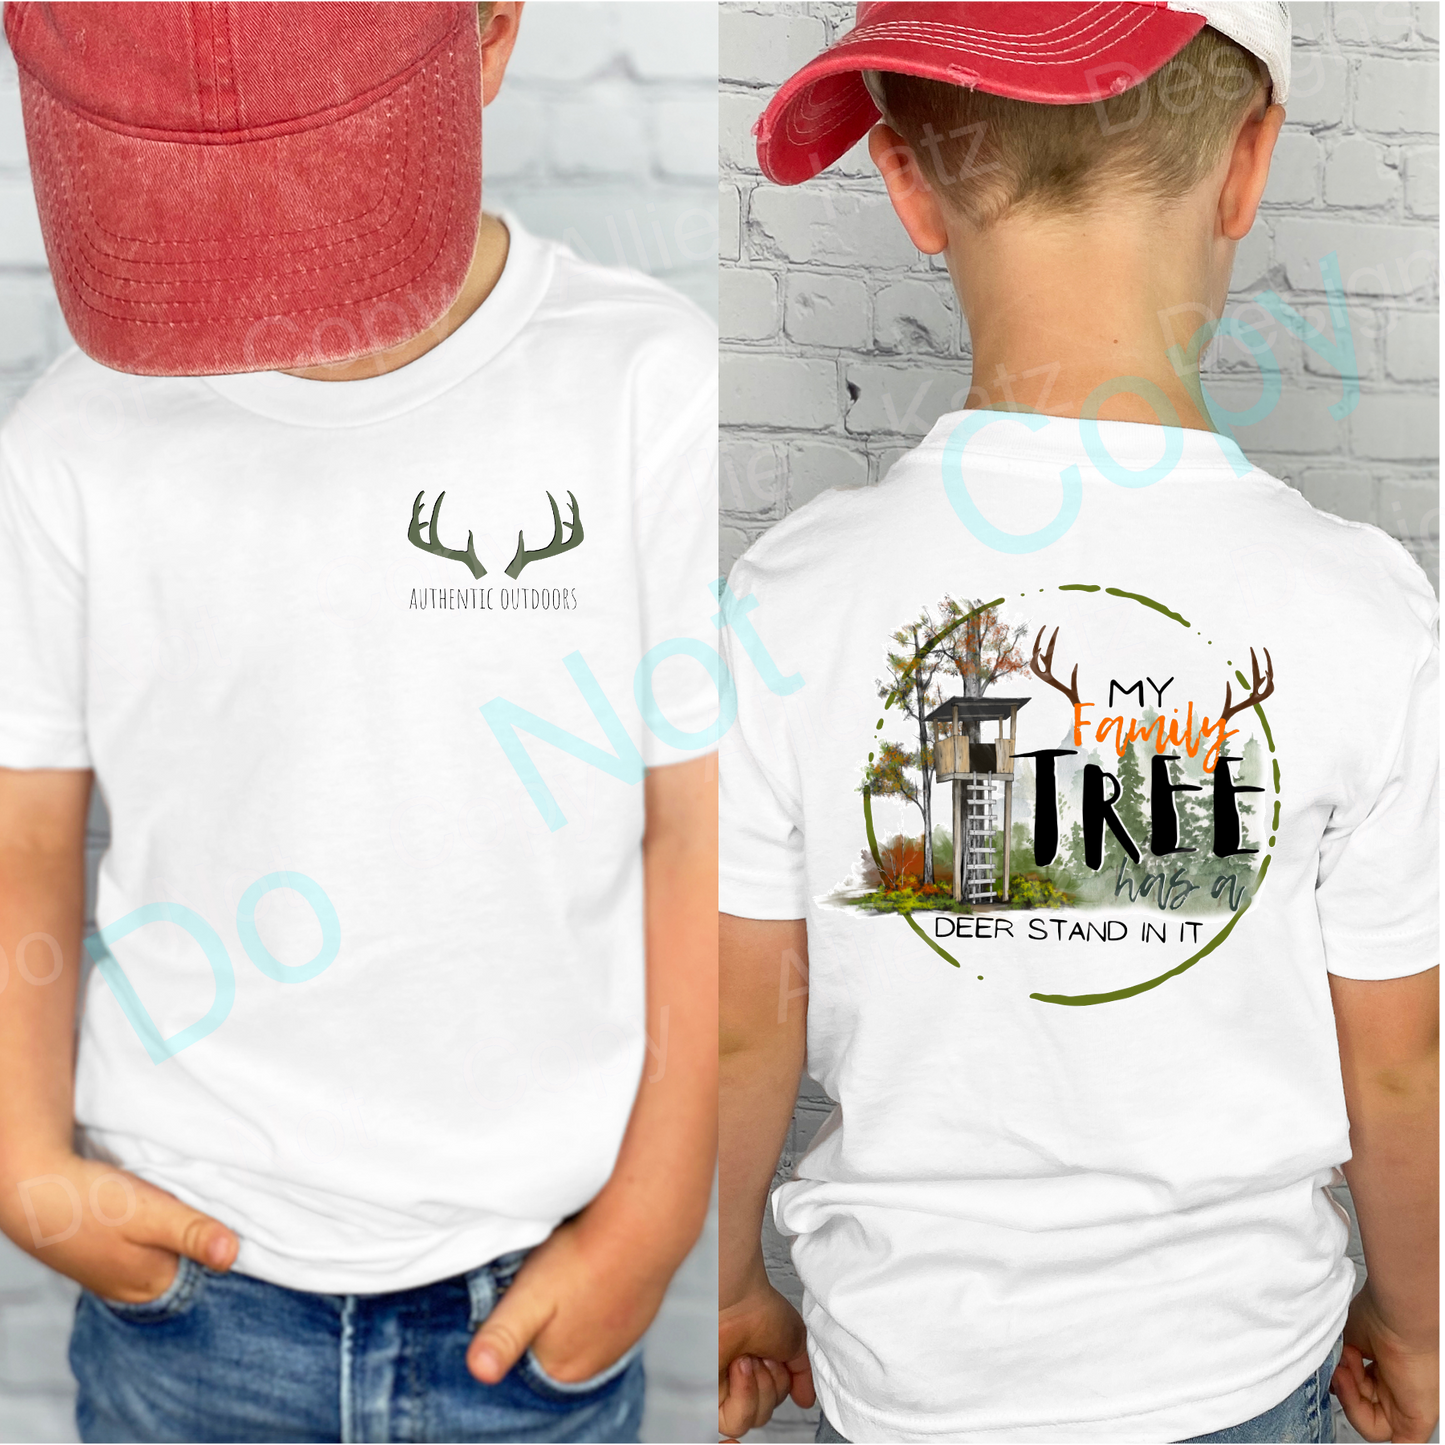 My Family Tree has a deer stand in it Comfort Colors Tee